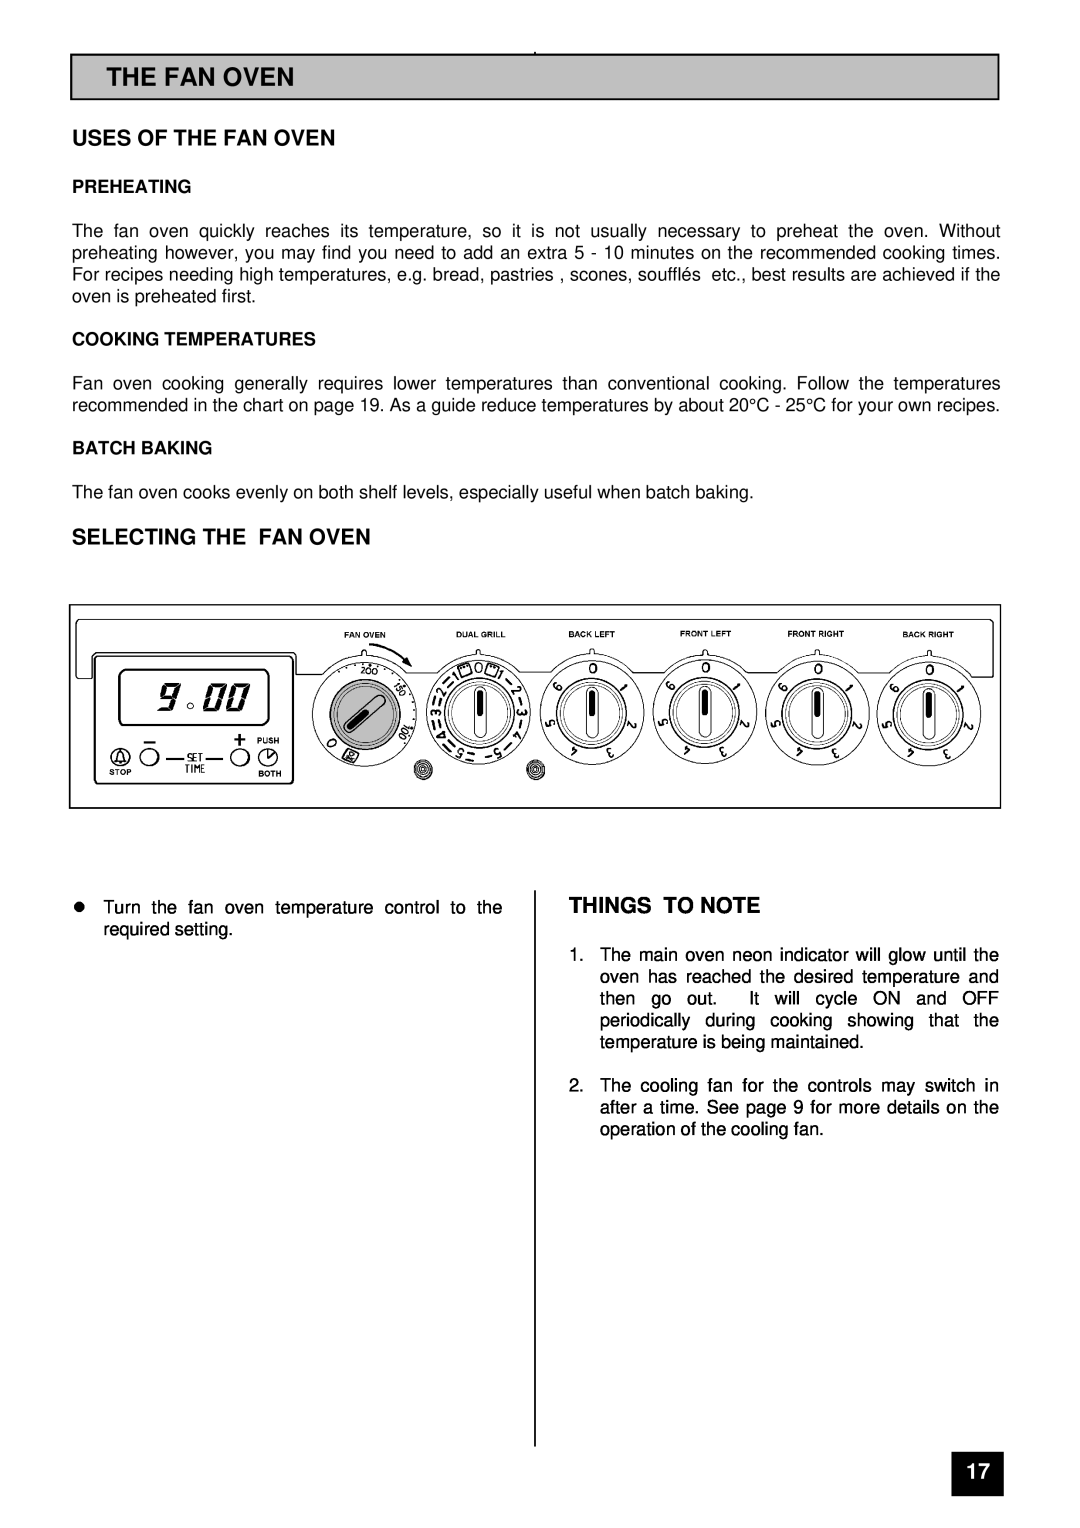 Zanussi ZCE 7300 manual Uses Of The Fan Oven, Selecting The Fan Oven, Things To Note, Preheating, Cooking Temperatures 